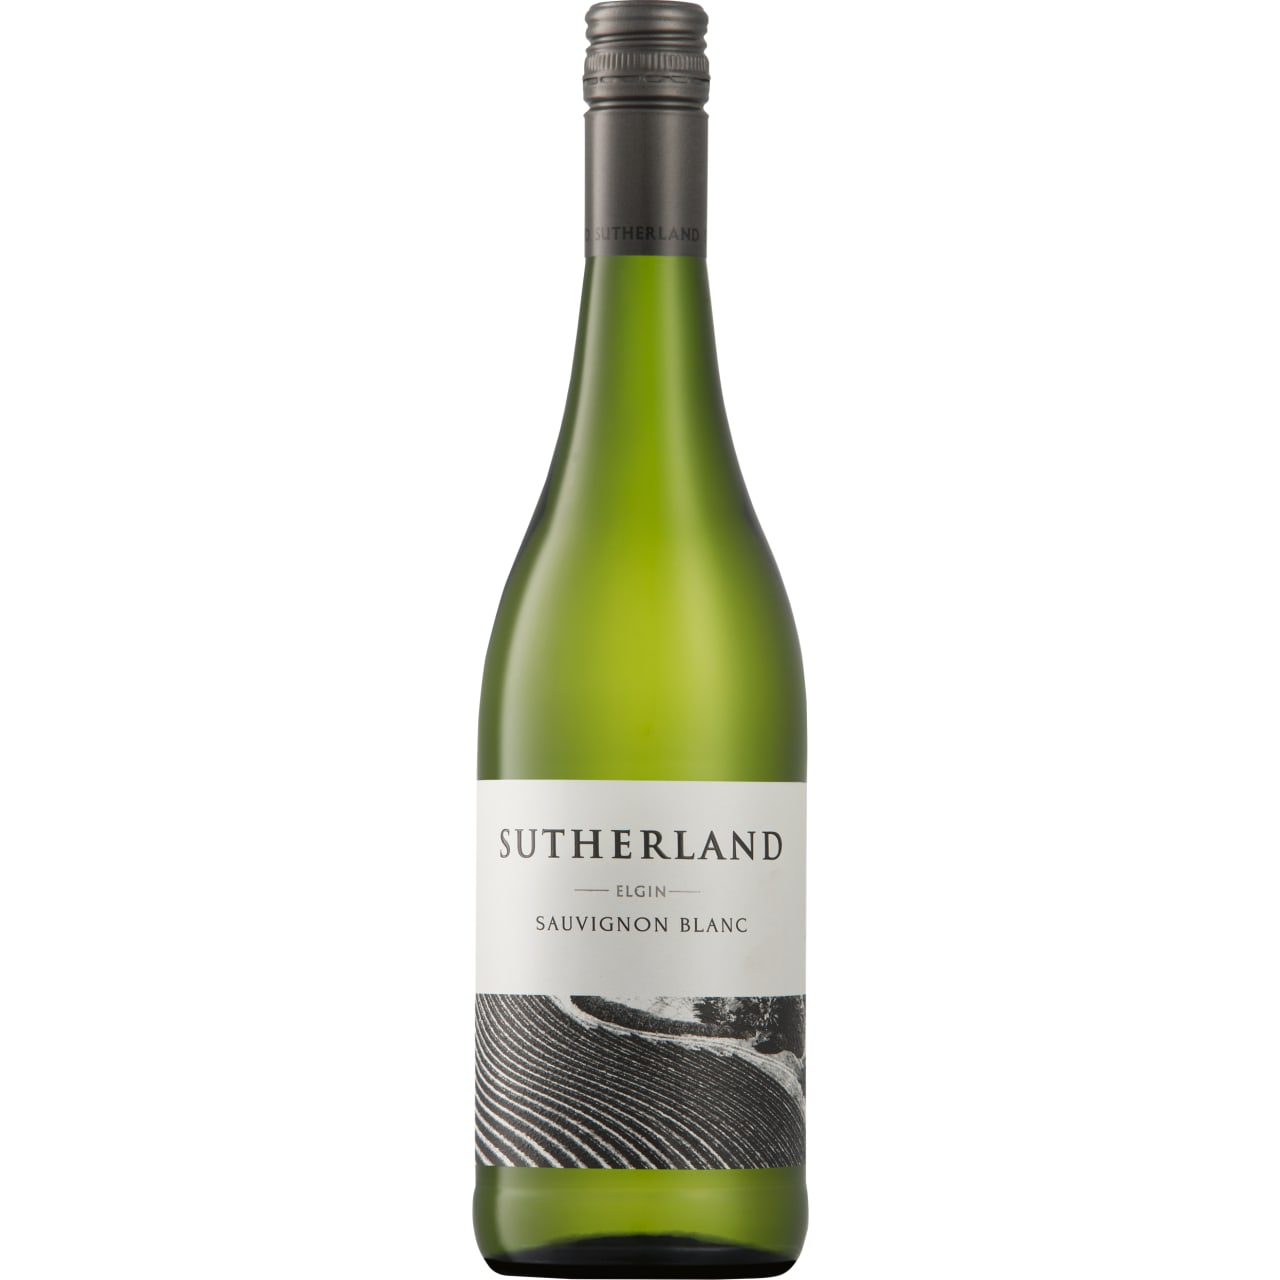 The wine is light gold in colour with youthful flashes of lime green, and on the nose is aromatic with aromas of bell peppers and fresh crushed herbs.